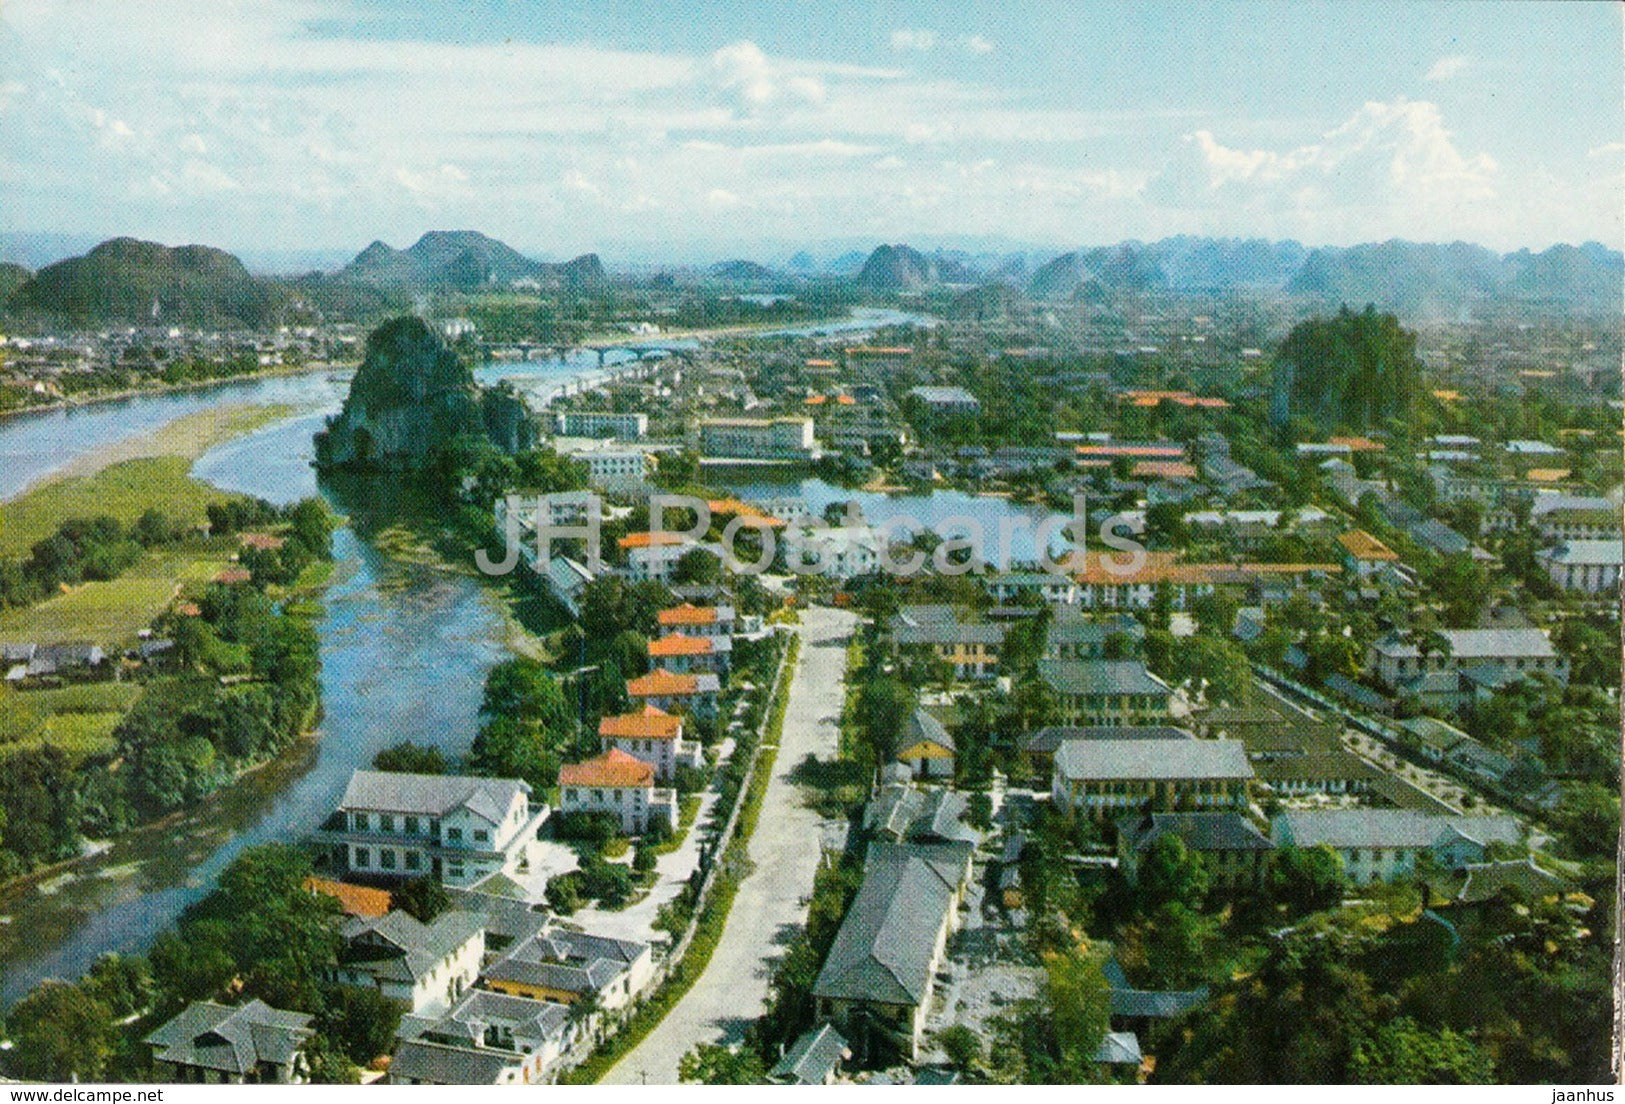 Kweilin - Guilin - A birds eye view of the city - 1973 - China - unused